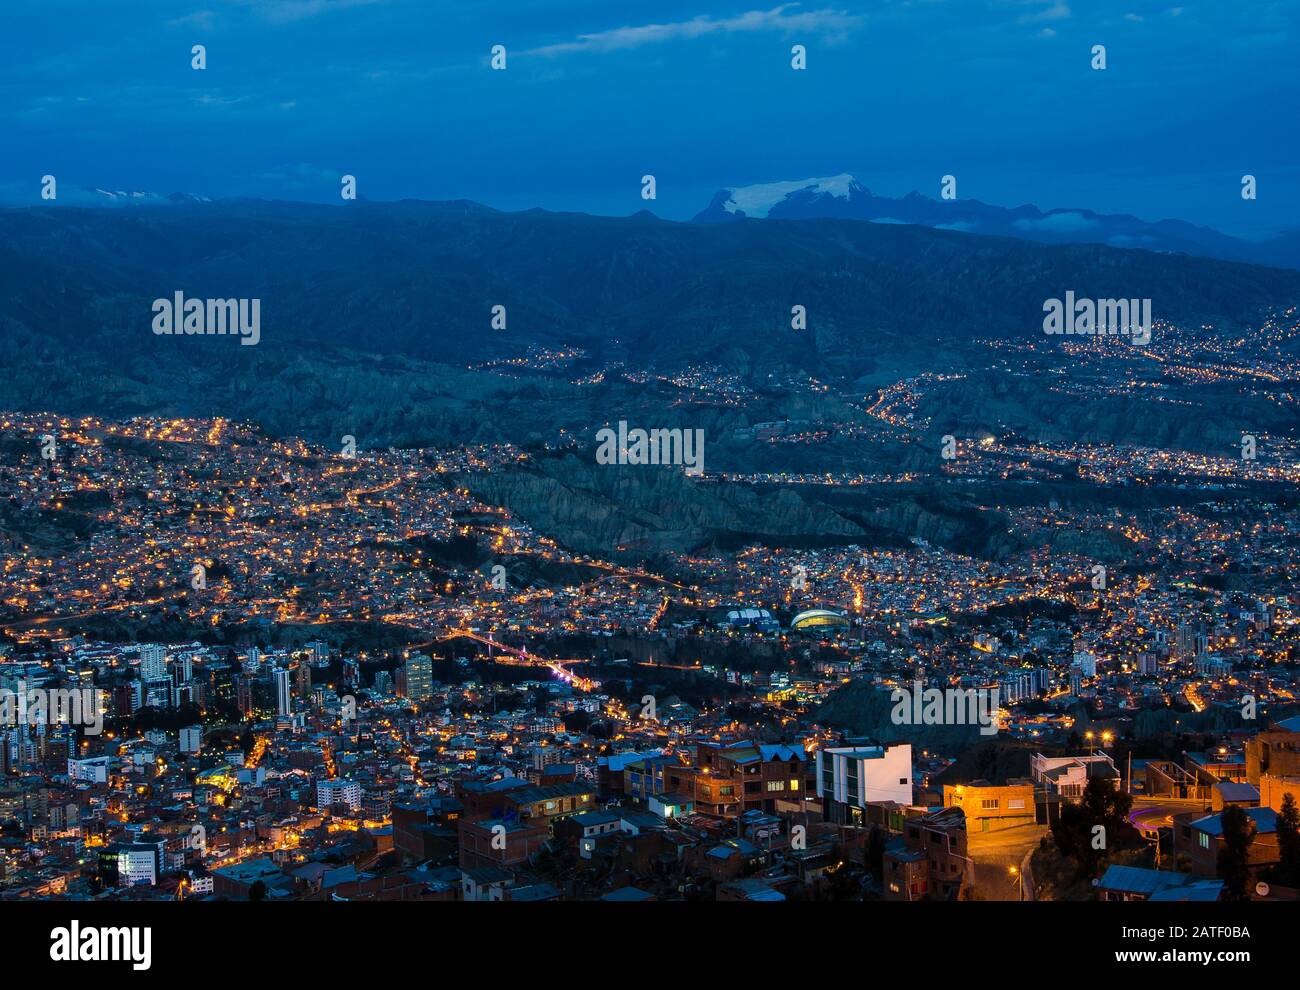 View over the city center of La Paz, Bolivia at night. On the left side the Metropolitan Cathedral on Murillo Square can be seen. Stock Photo